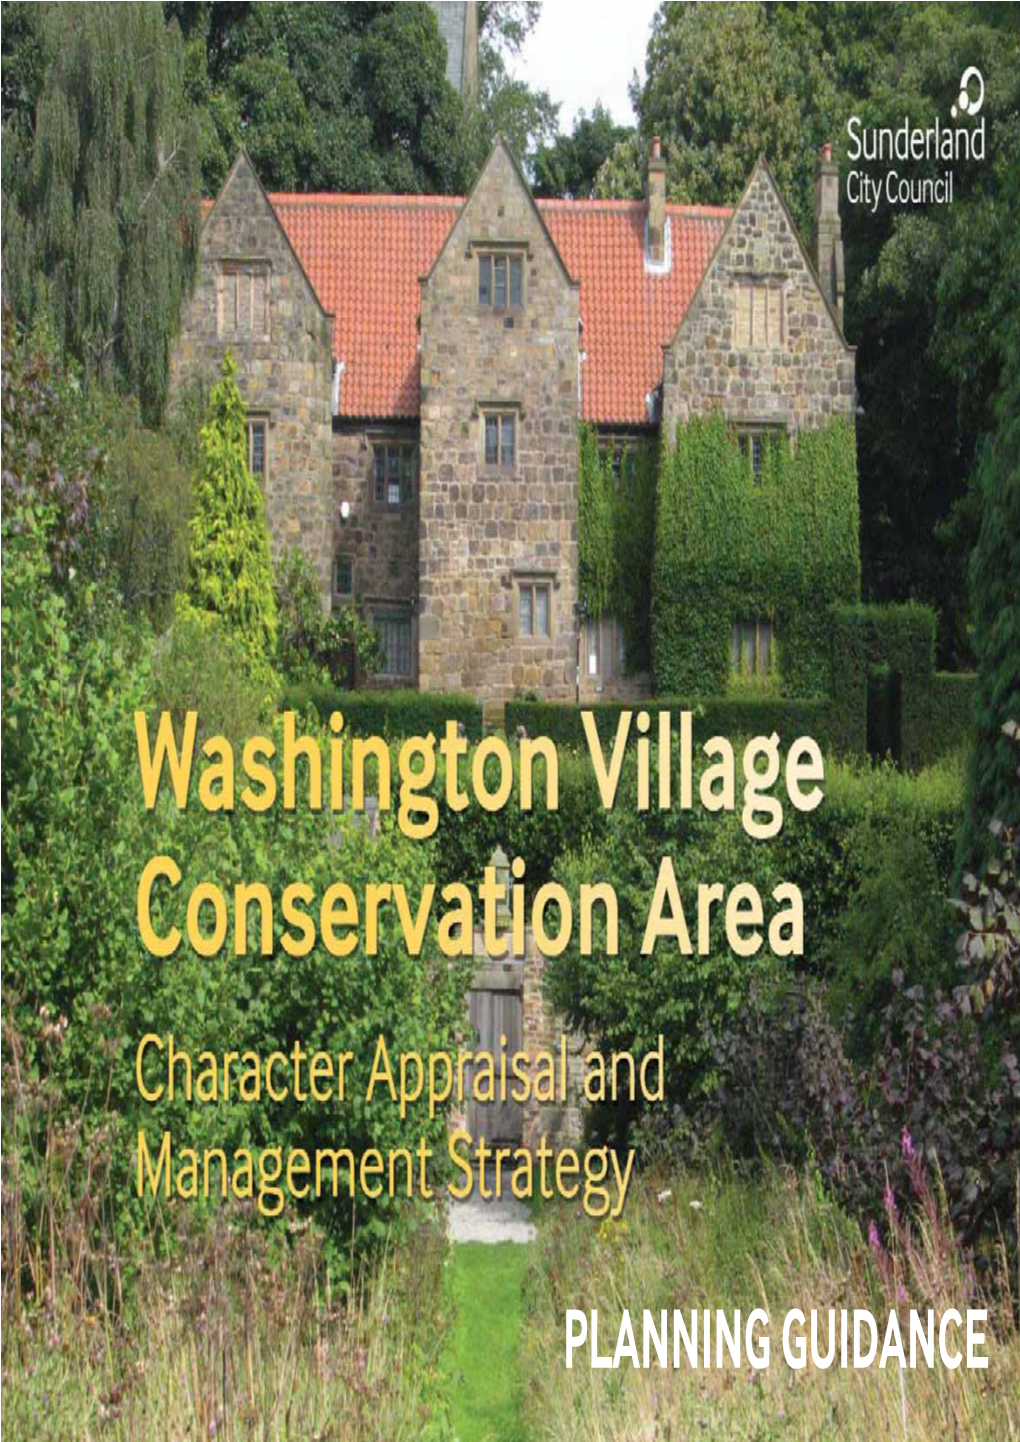 Washington Village Conservation Area Character Appraisal and Management Strategy